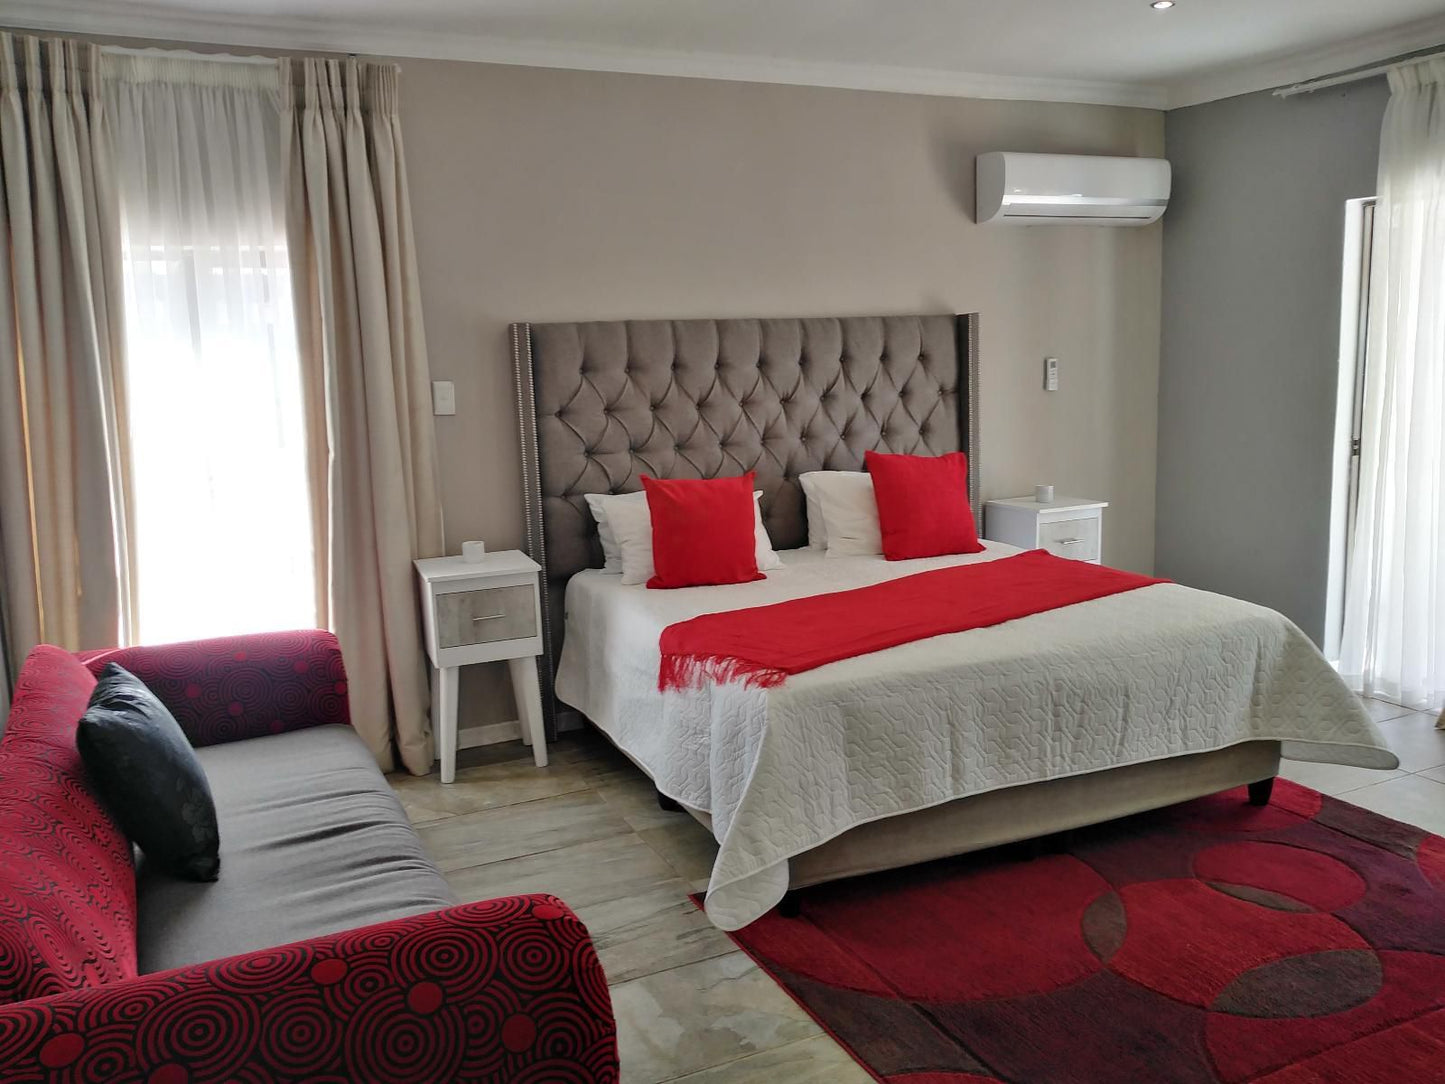 On Hill Lodge Bayswater Bloemfontein Free State South Africa Bedroom